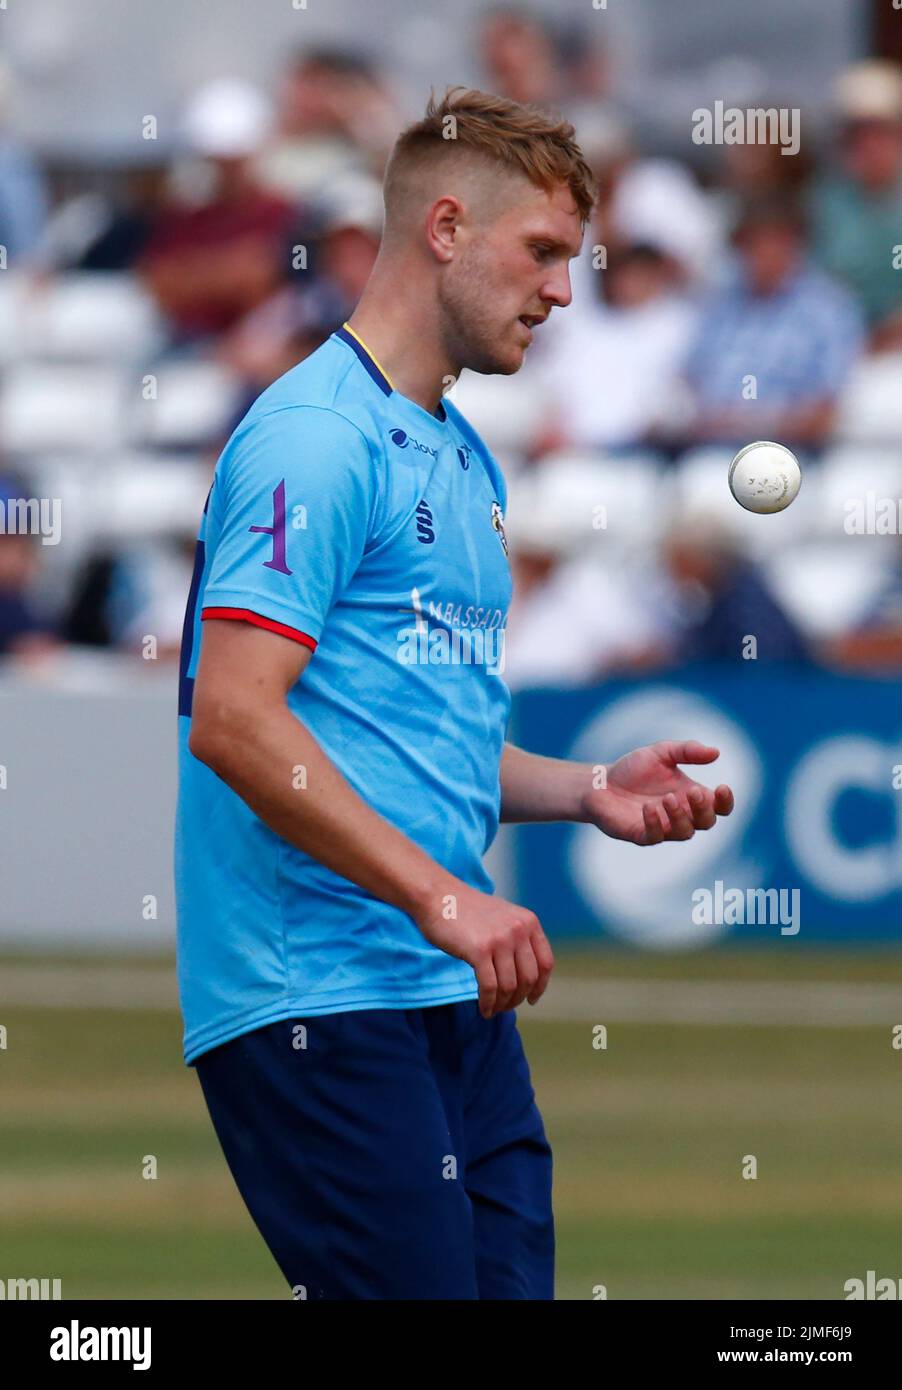 CHELMSFORD ENGLAND - AUGUST  05 : Essex's Jamie Porter during Royal London One-Day Cup match between Essex Eagles CCC against Derbyshire CCC at The Cl Stock Photo